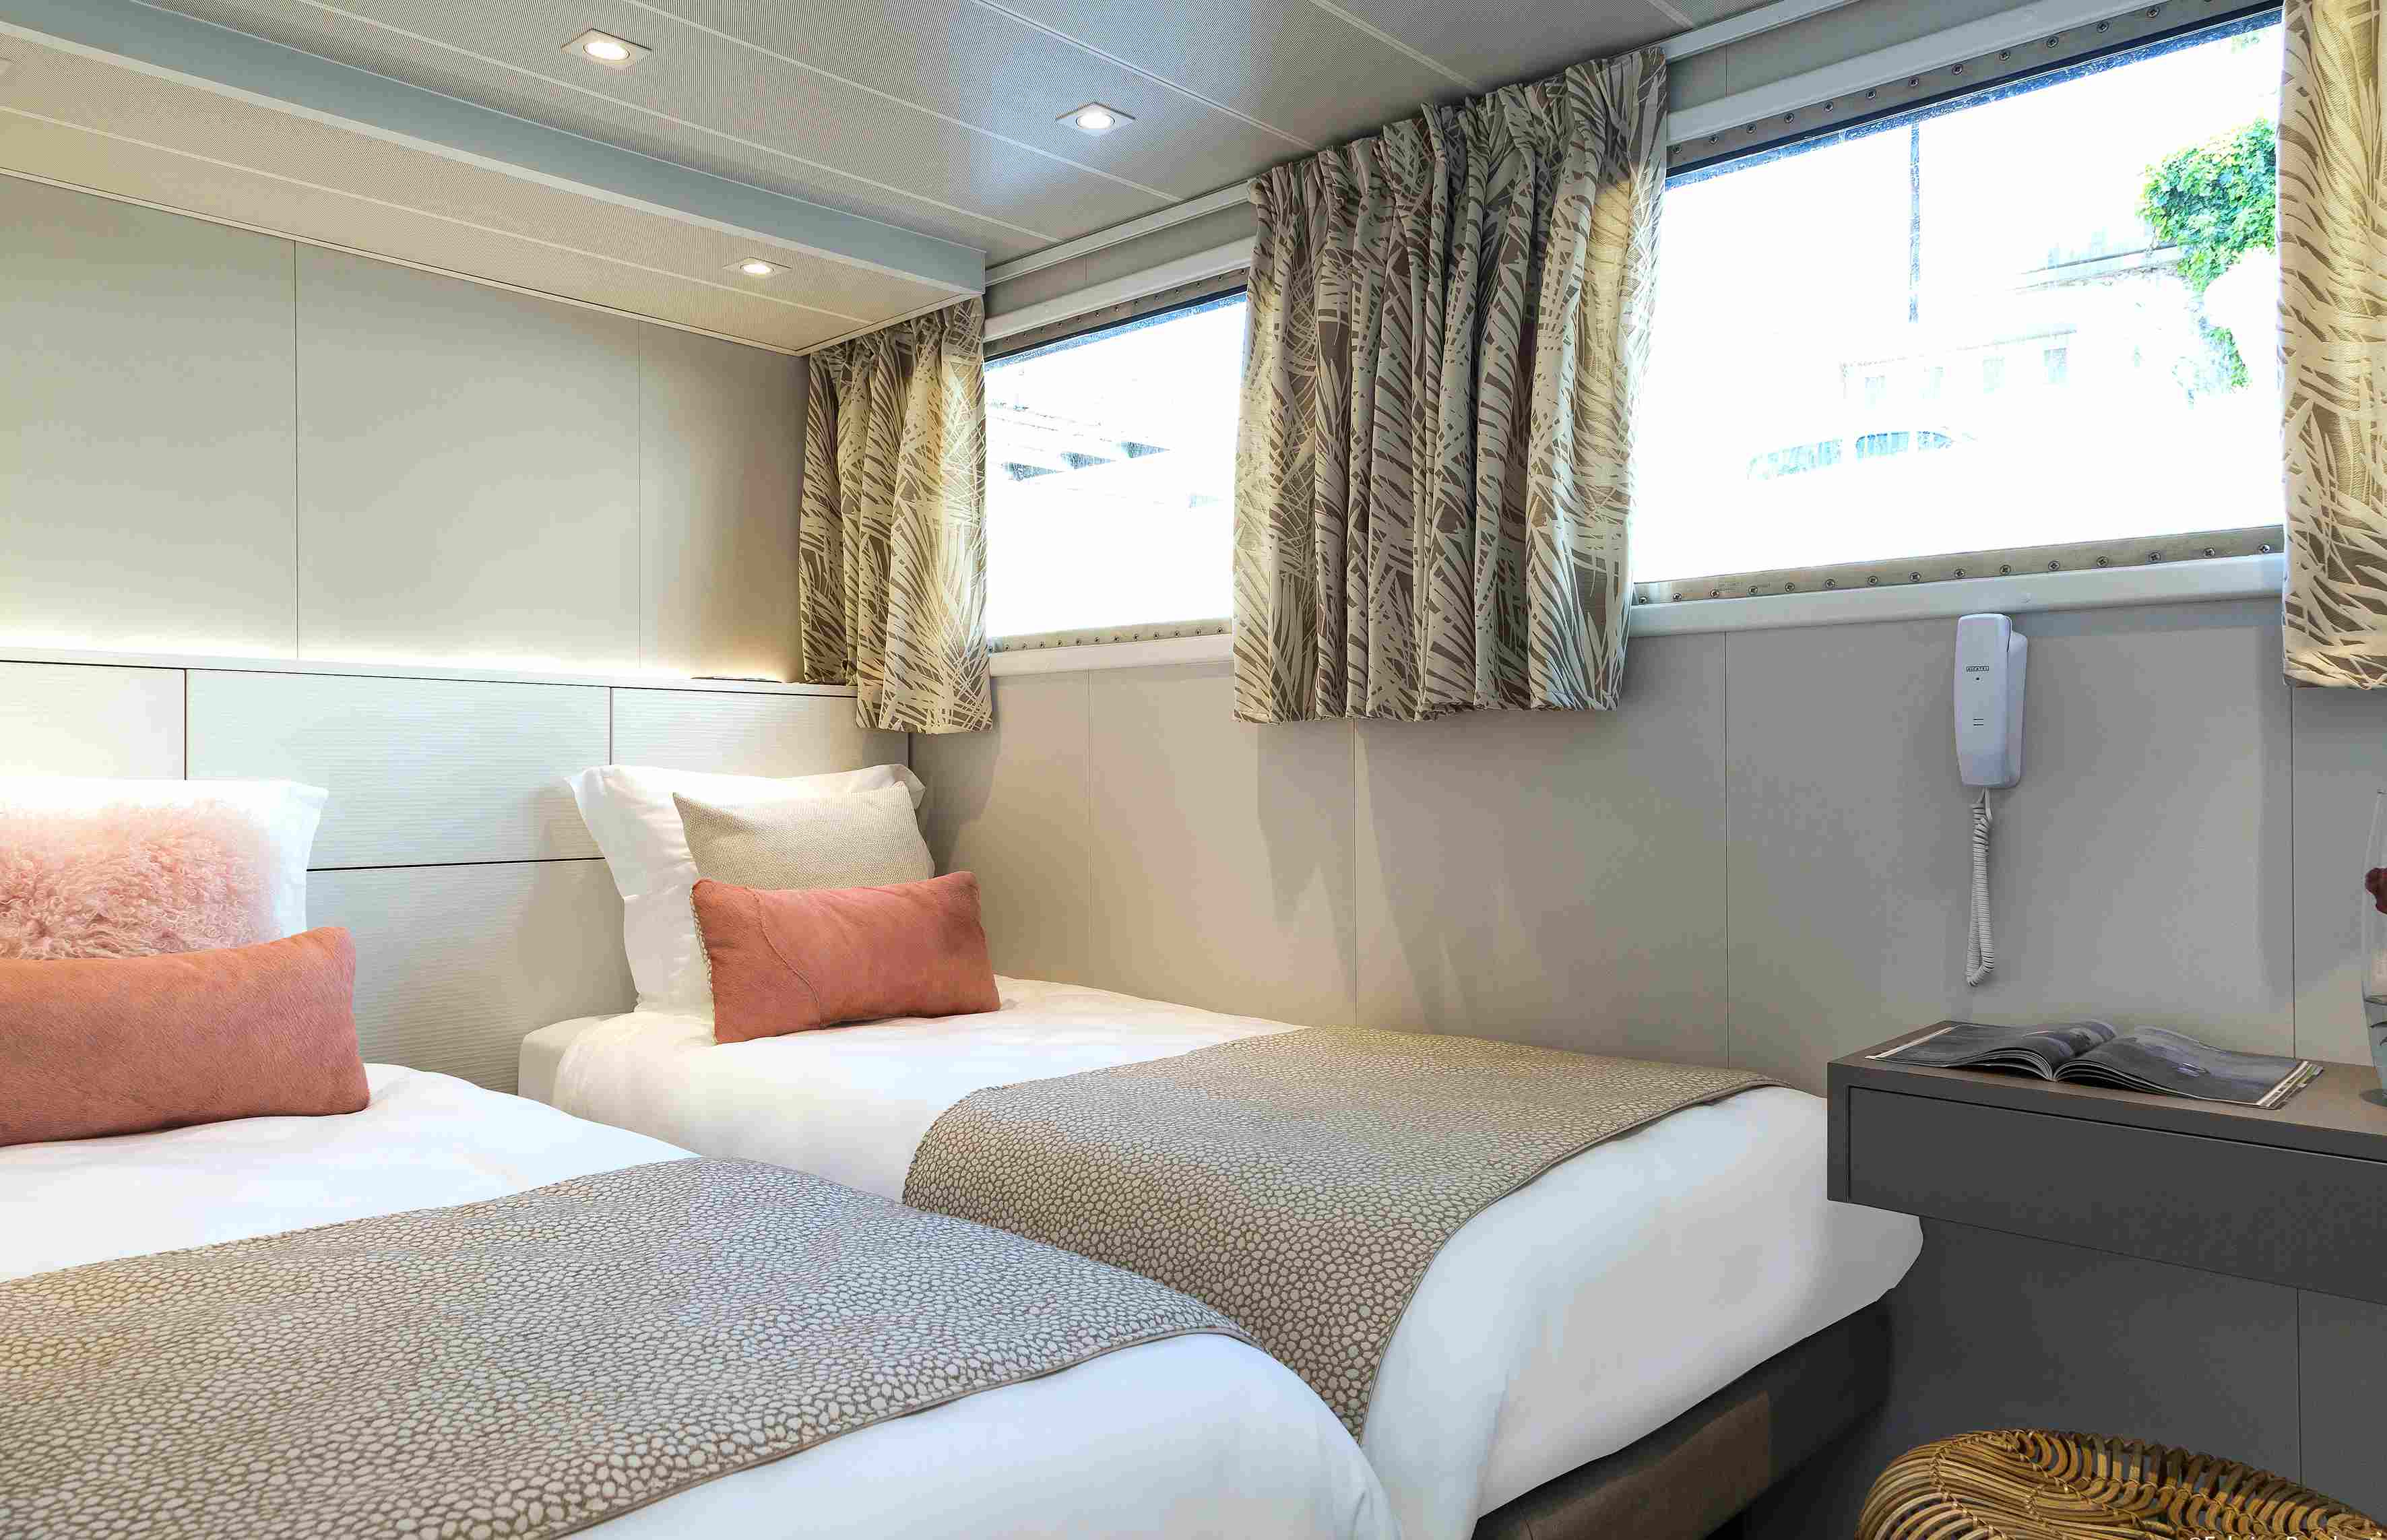 Cabin onboard CroisiEurope Anne-Marie barge (Image: Courtesy of CroisiEurope)